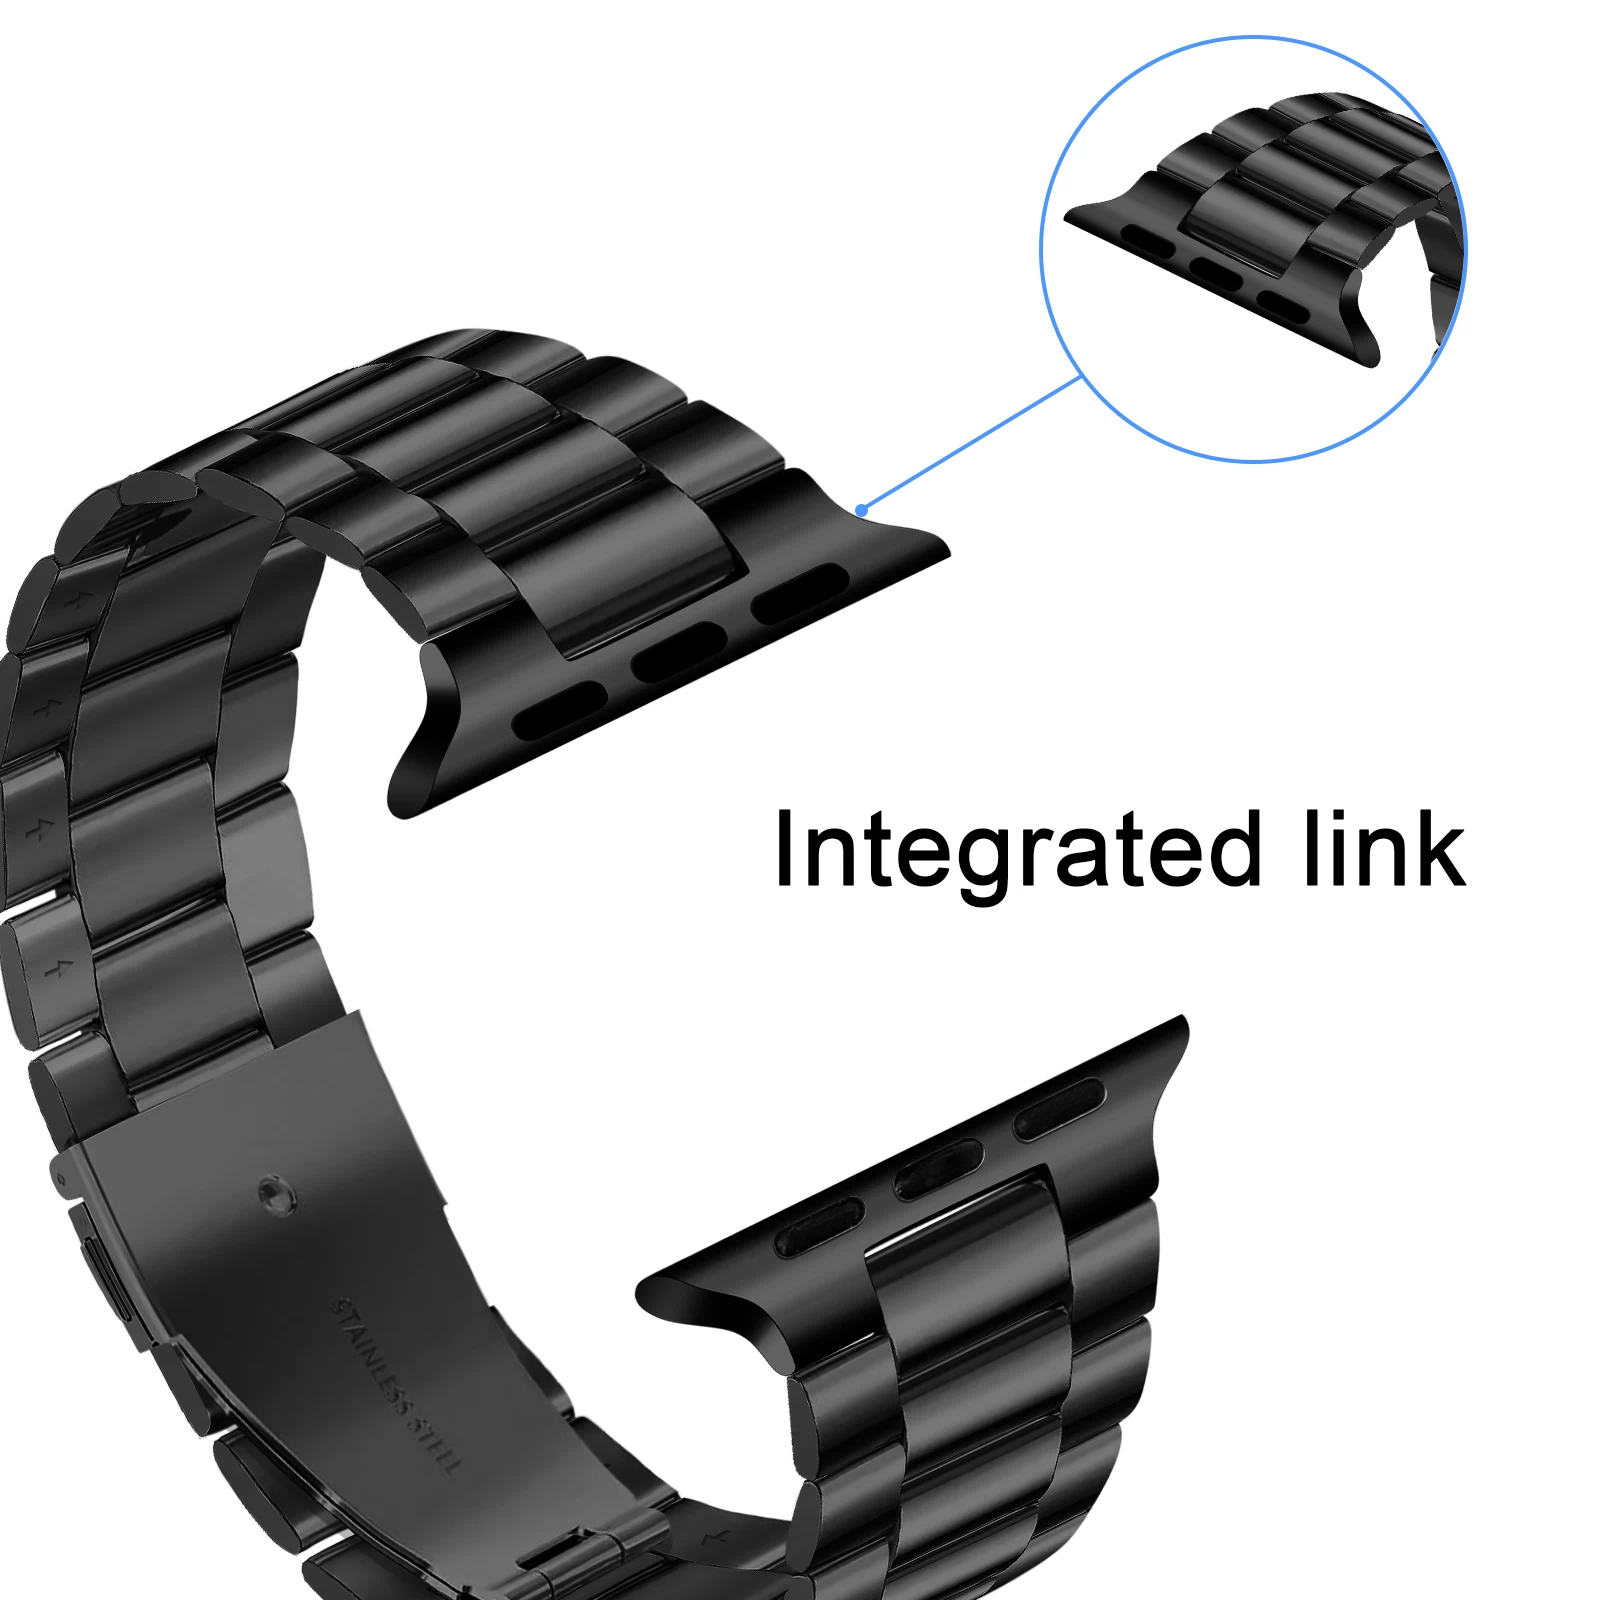 Chain Link Bracelet Band for Apple Watch®